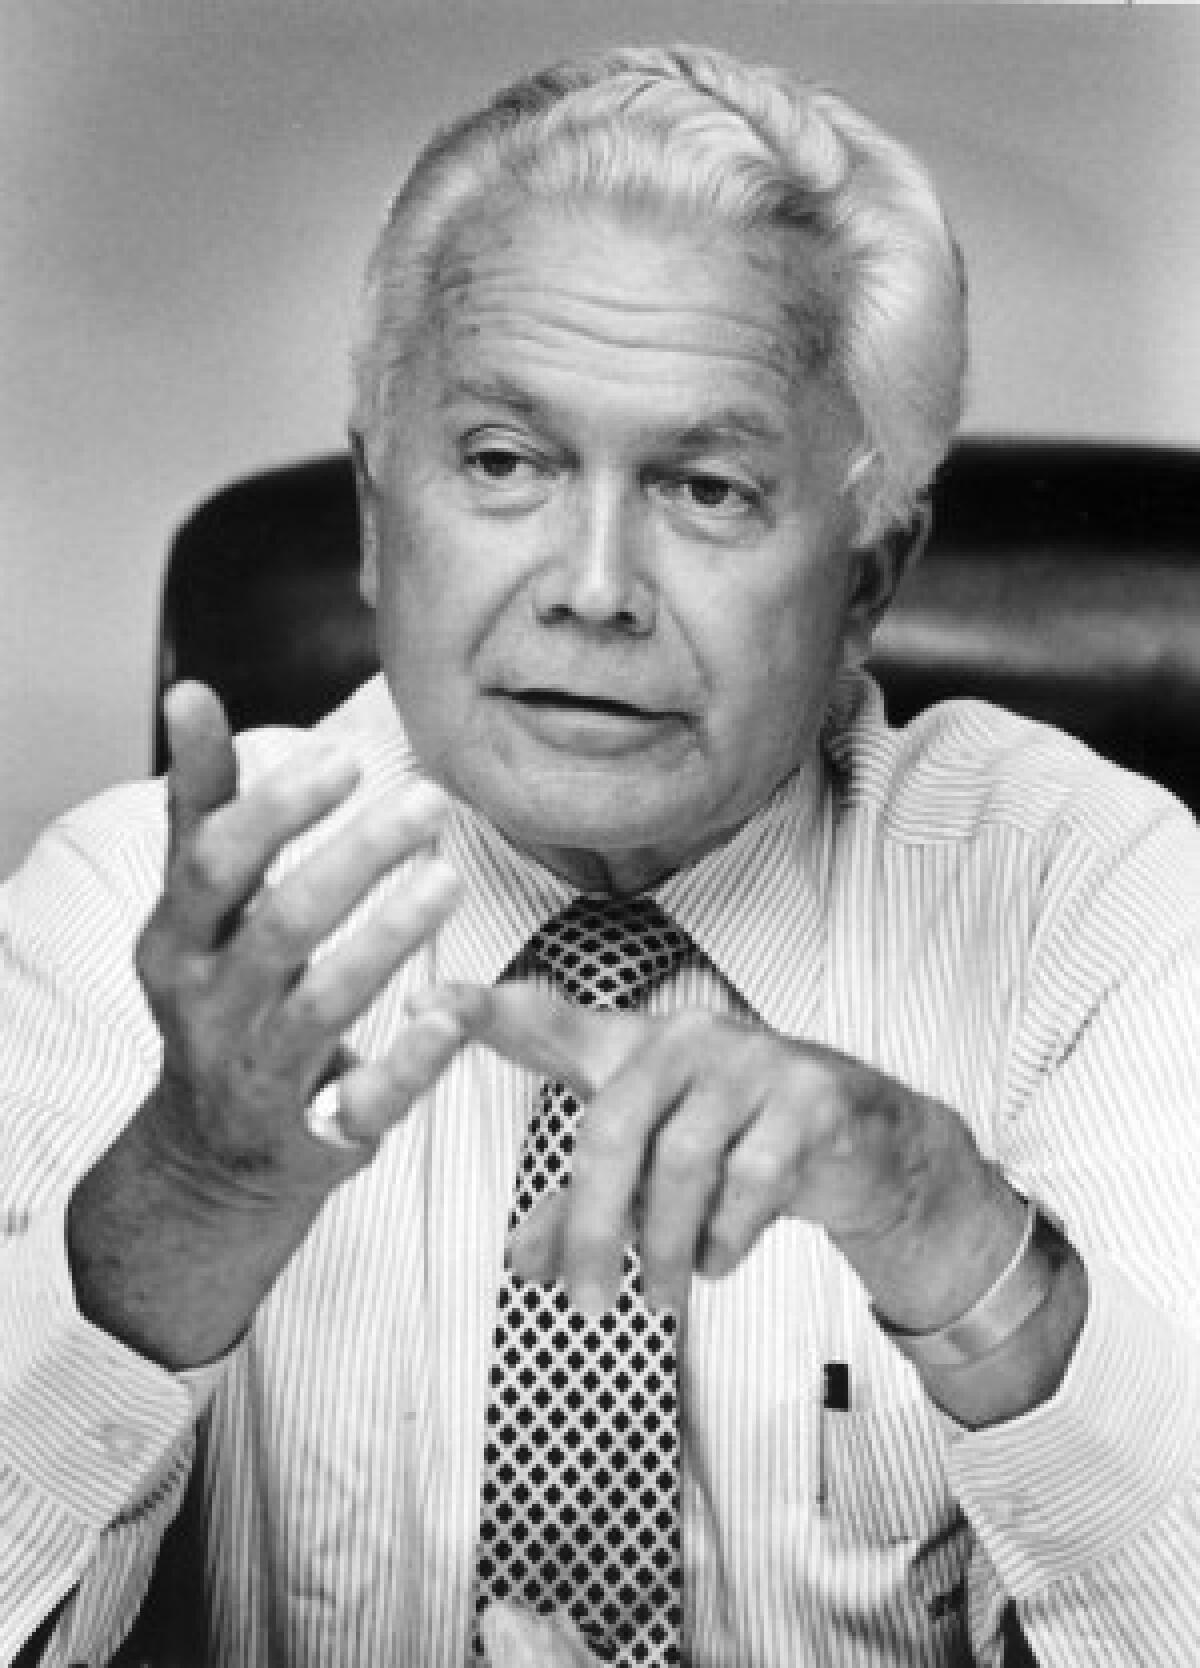 Robert G. Beverly, seen in 1988, may be best known for consumer-protection legislation that led to California's lemon laws. He said one of his most effective measures was a 'rob-a-home, go-to-jail' bill.